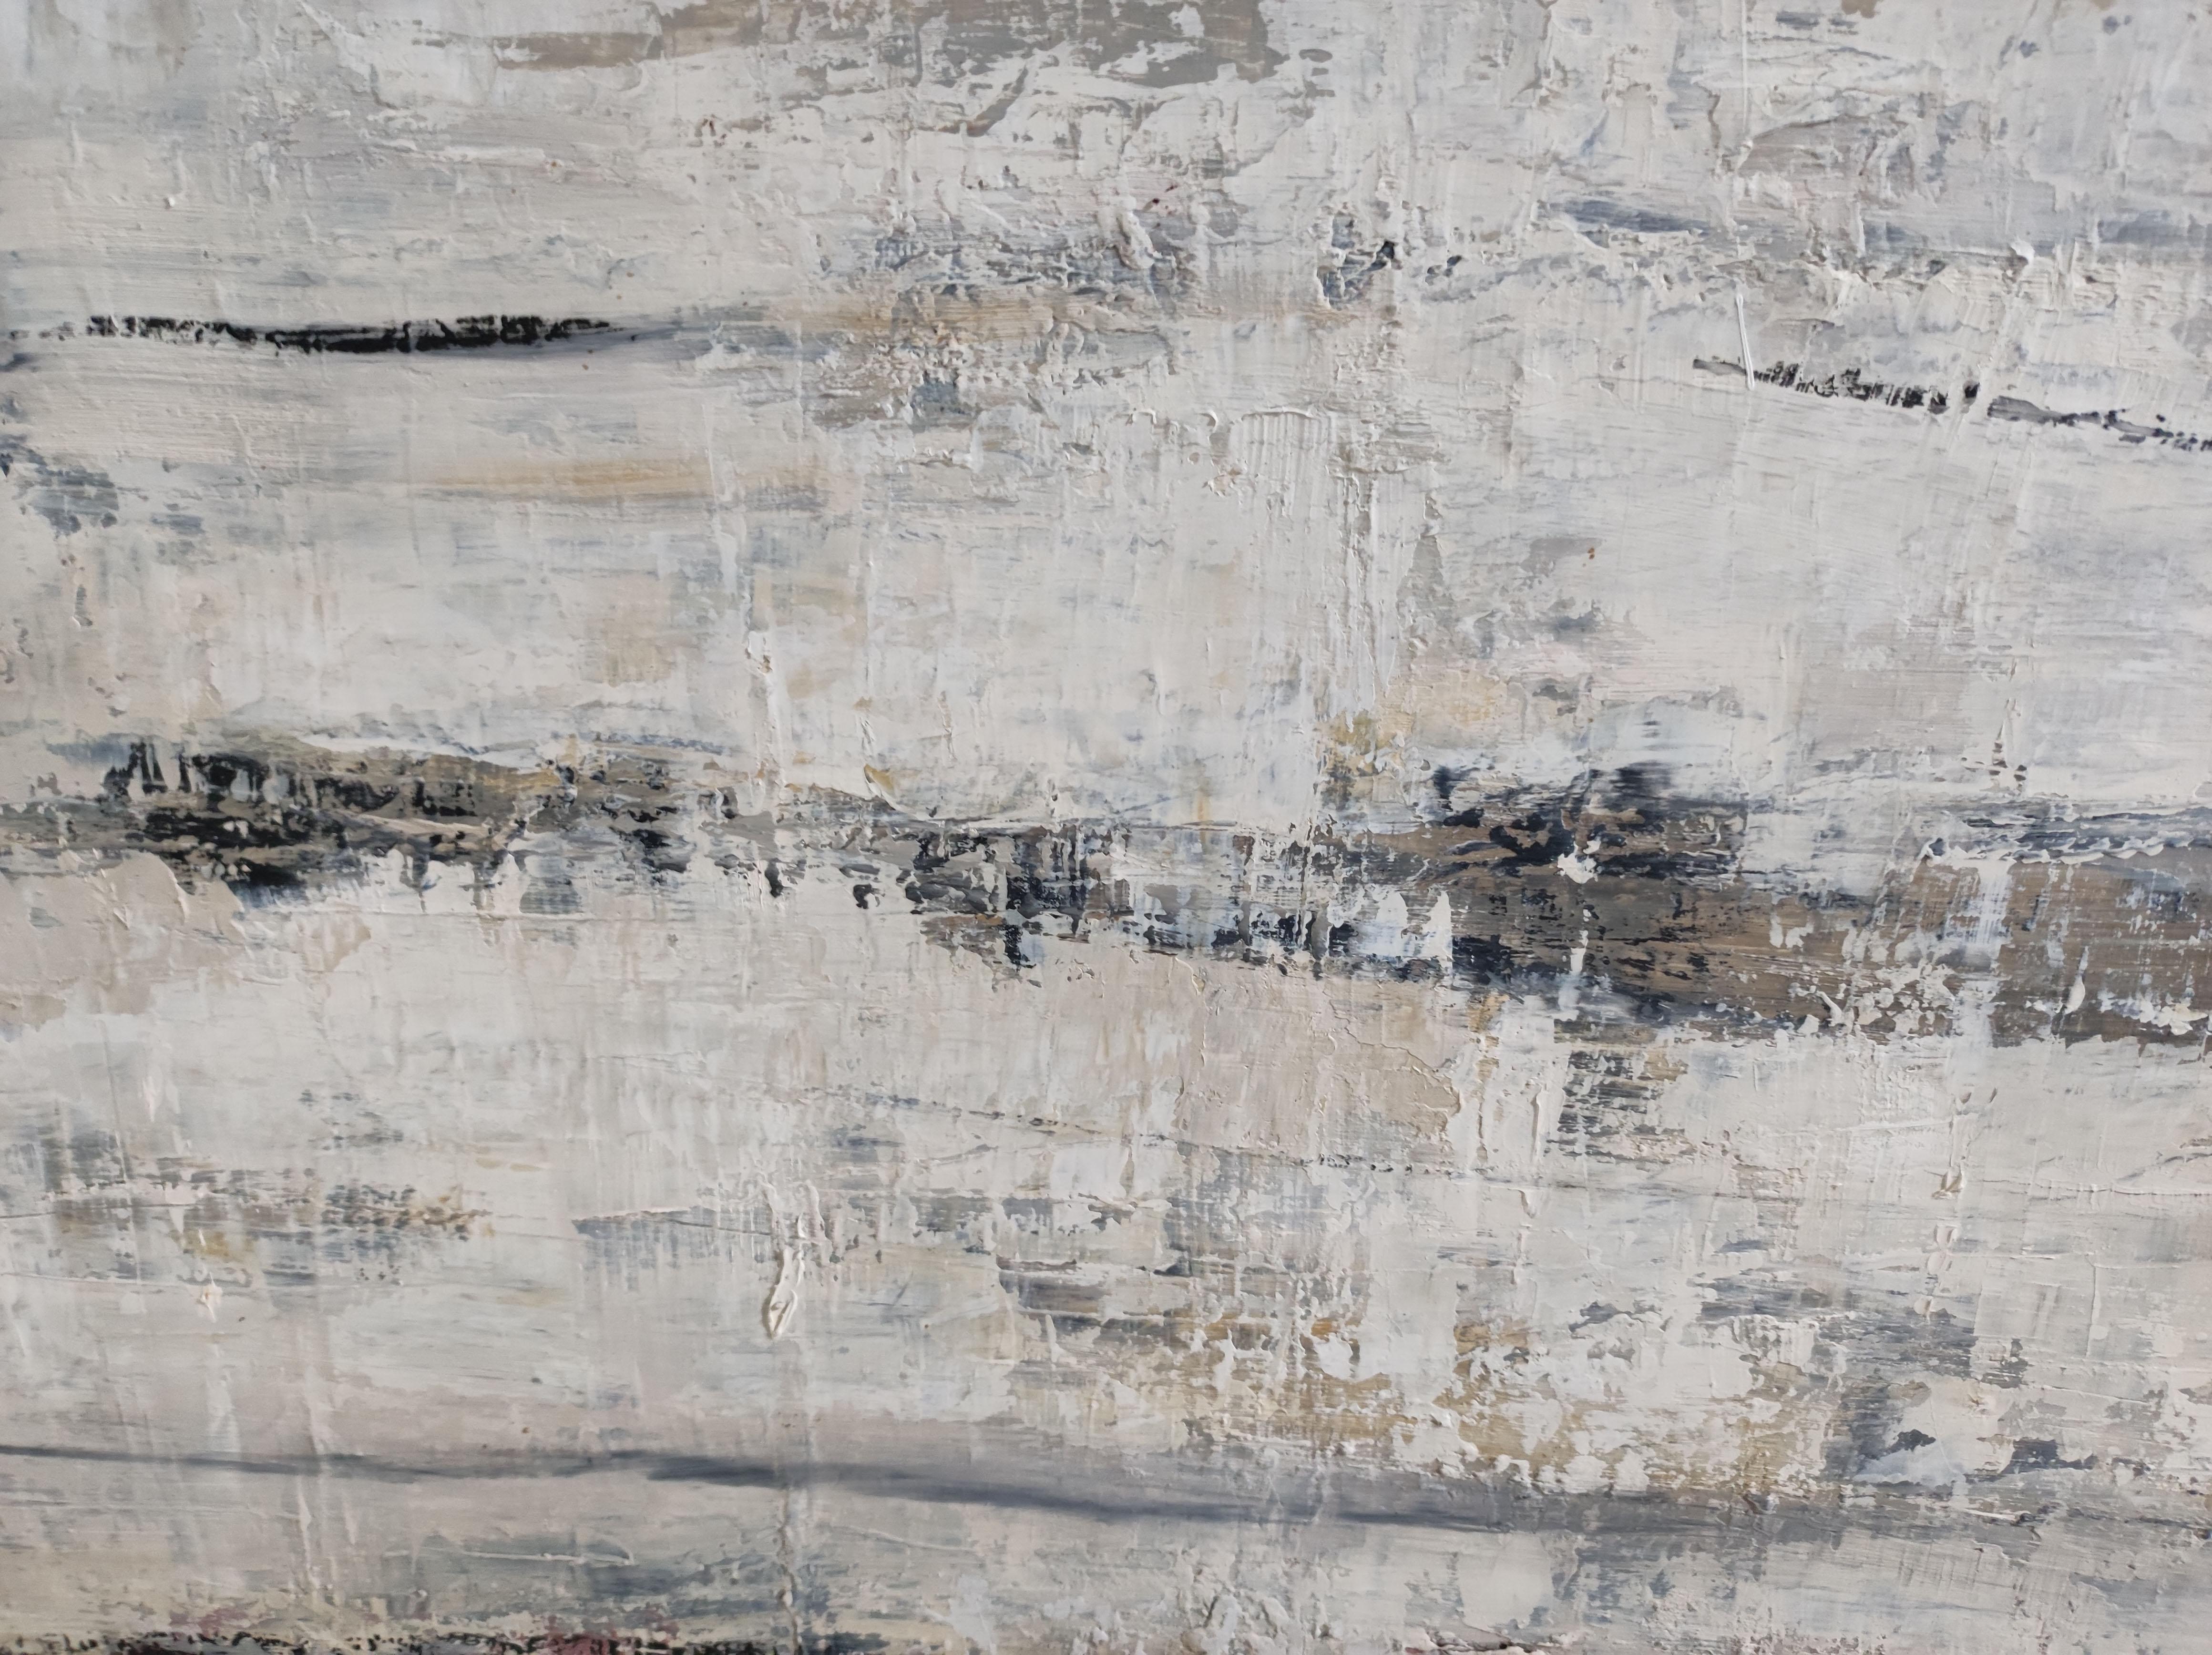 abstract oil painting on canvas worked in shades of white, gray and ocher, the viewer can guess a snowy field or see only a lyrical abstraction. The forms act with temperance and a feeling of freedom and infinity invades us.
The construction is